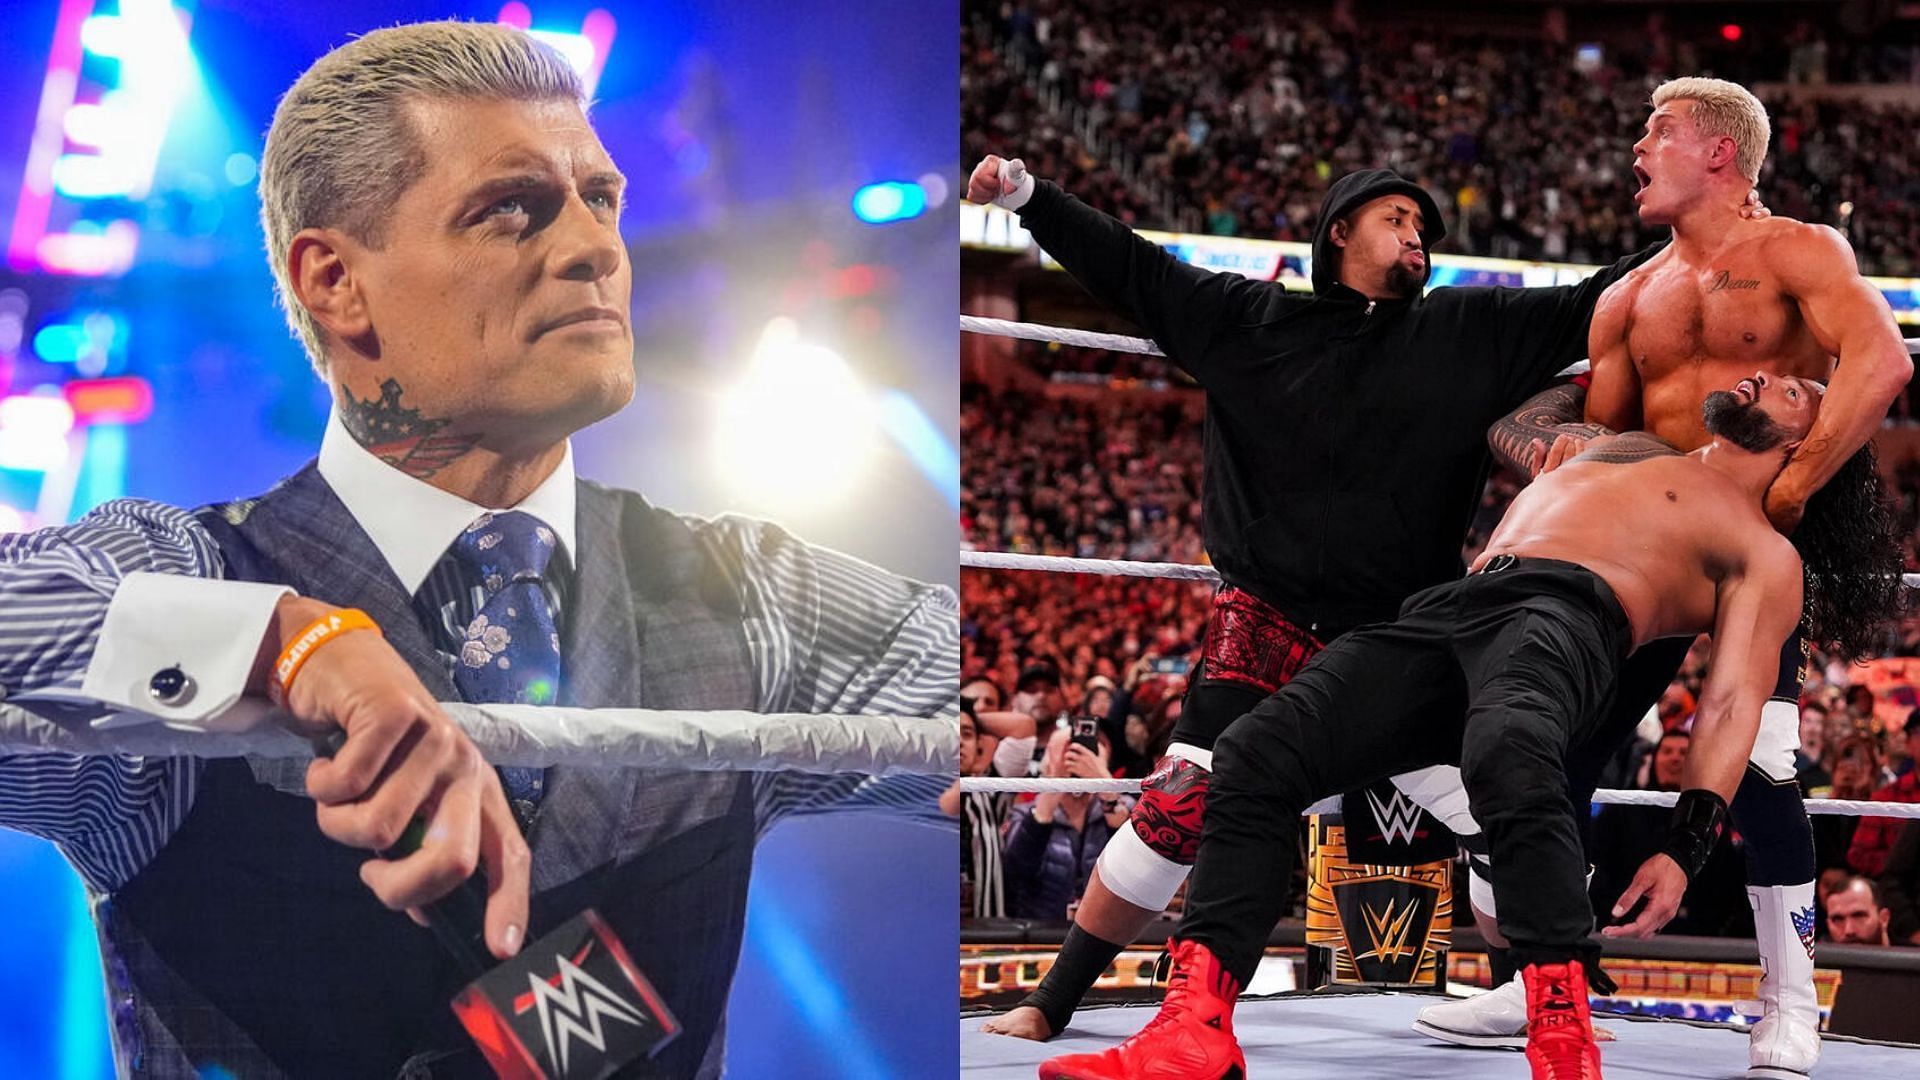 Cody Rhodes will challenge Roman Reigns once again at The Grandest Stage of Them All